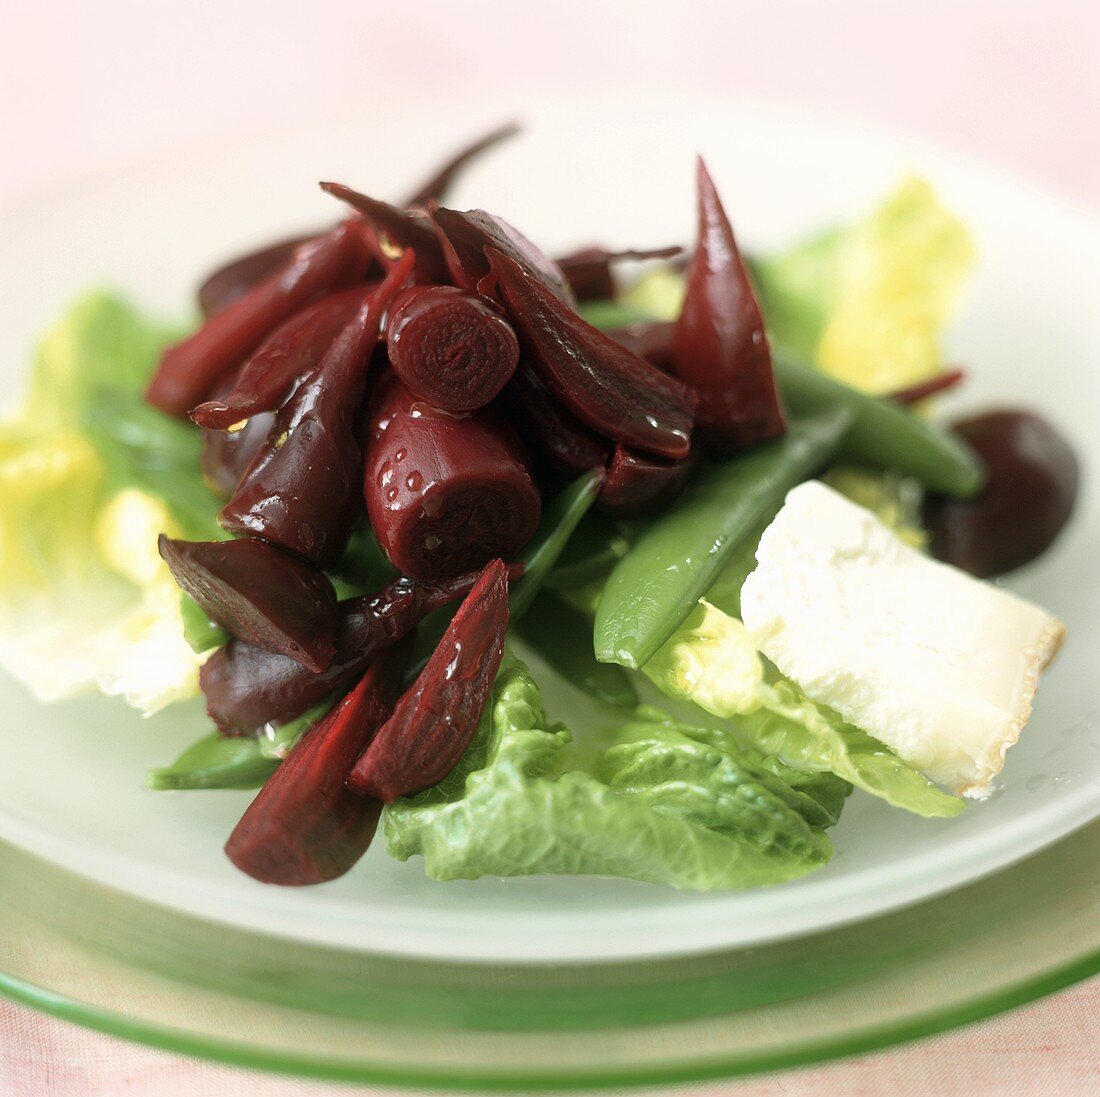 Beetroot salad with sugar snap peas and cheese